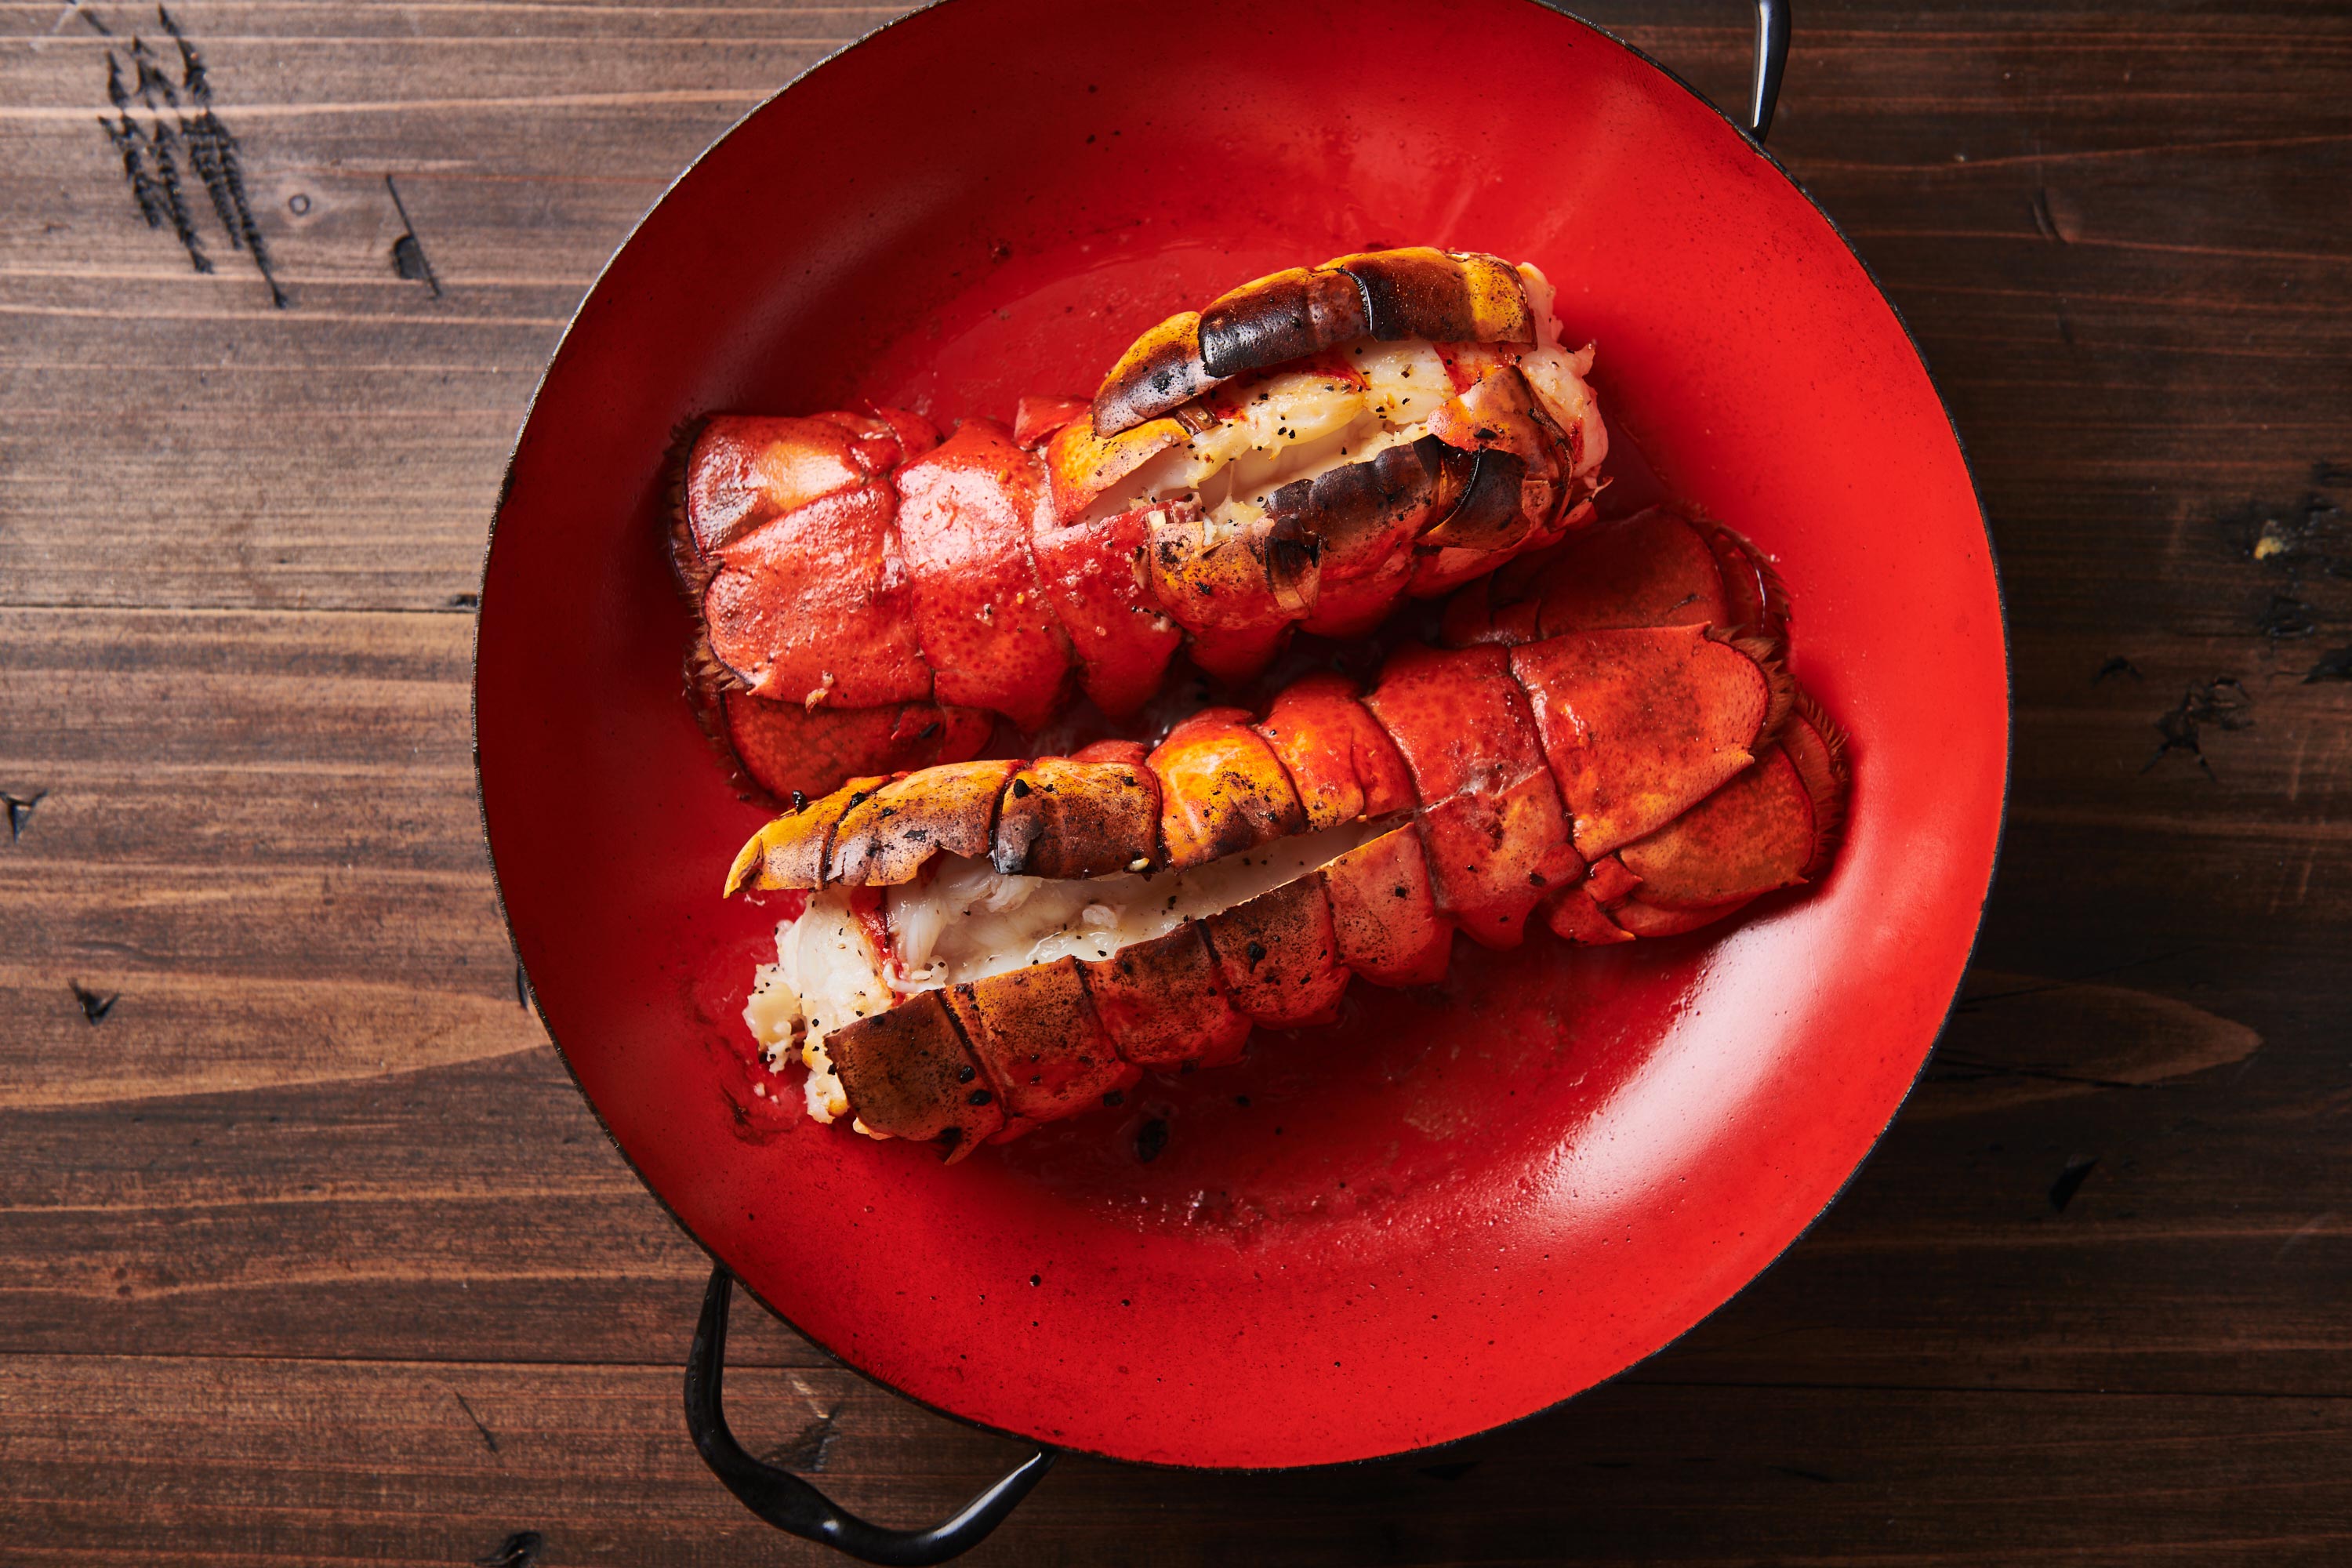 Two broiled lobster tails on a red baking pan.